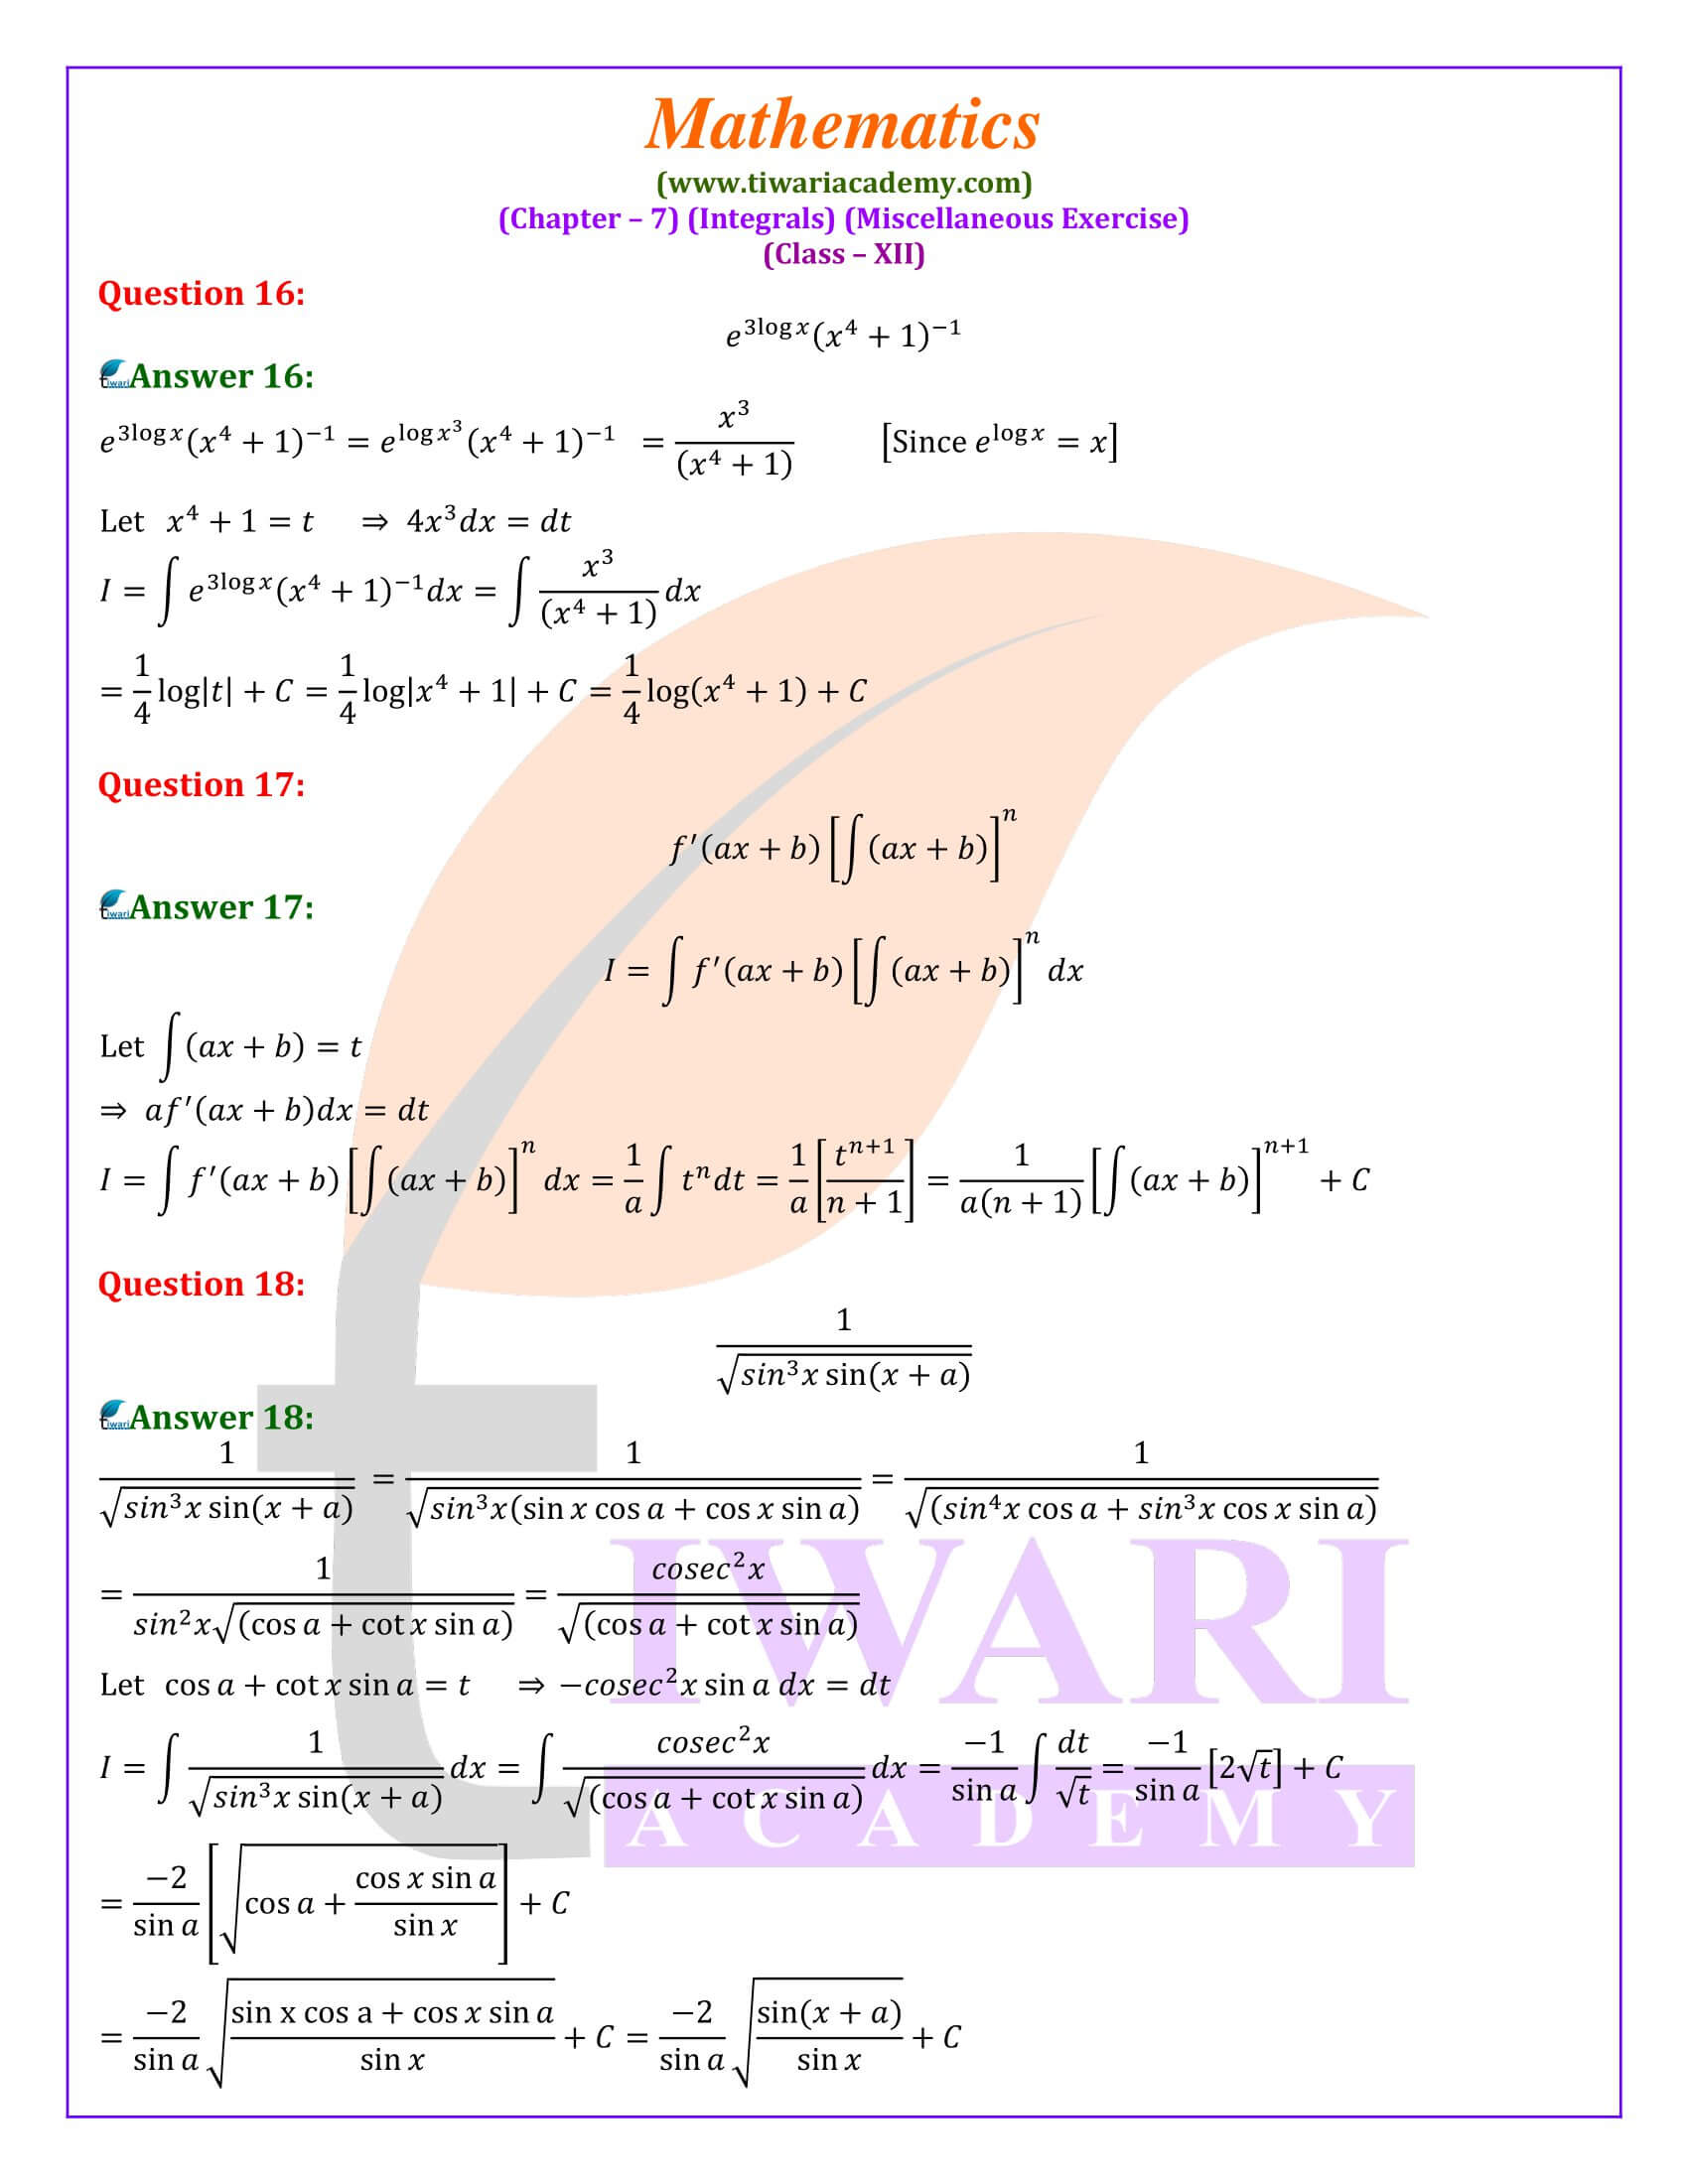 NCERT Solutions 12th Maths Chapter 7 Misc. Exercise